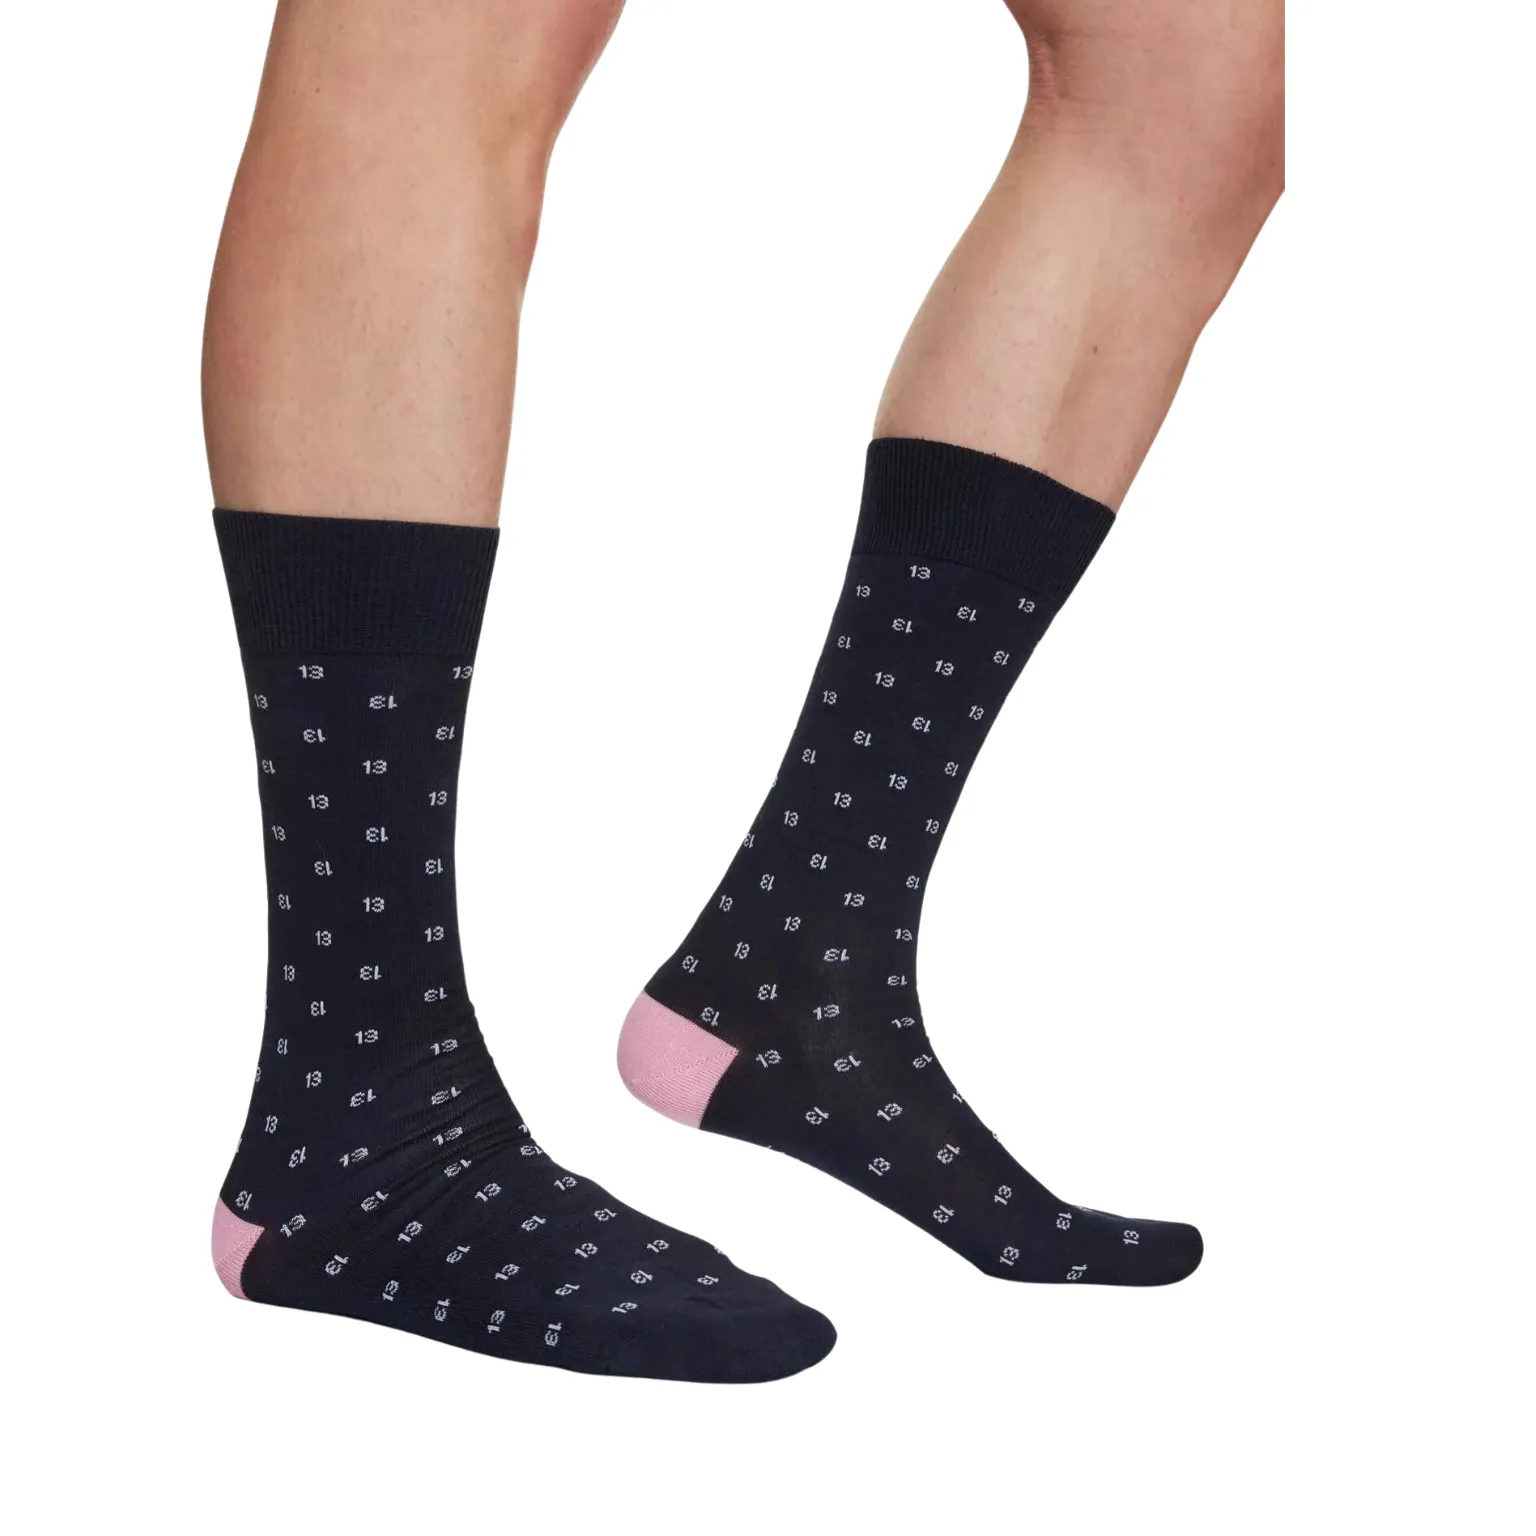 Printed Socks smanufacturing with superior quality